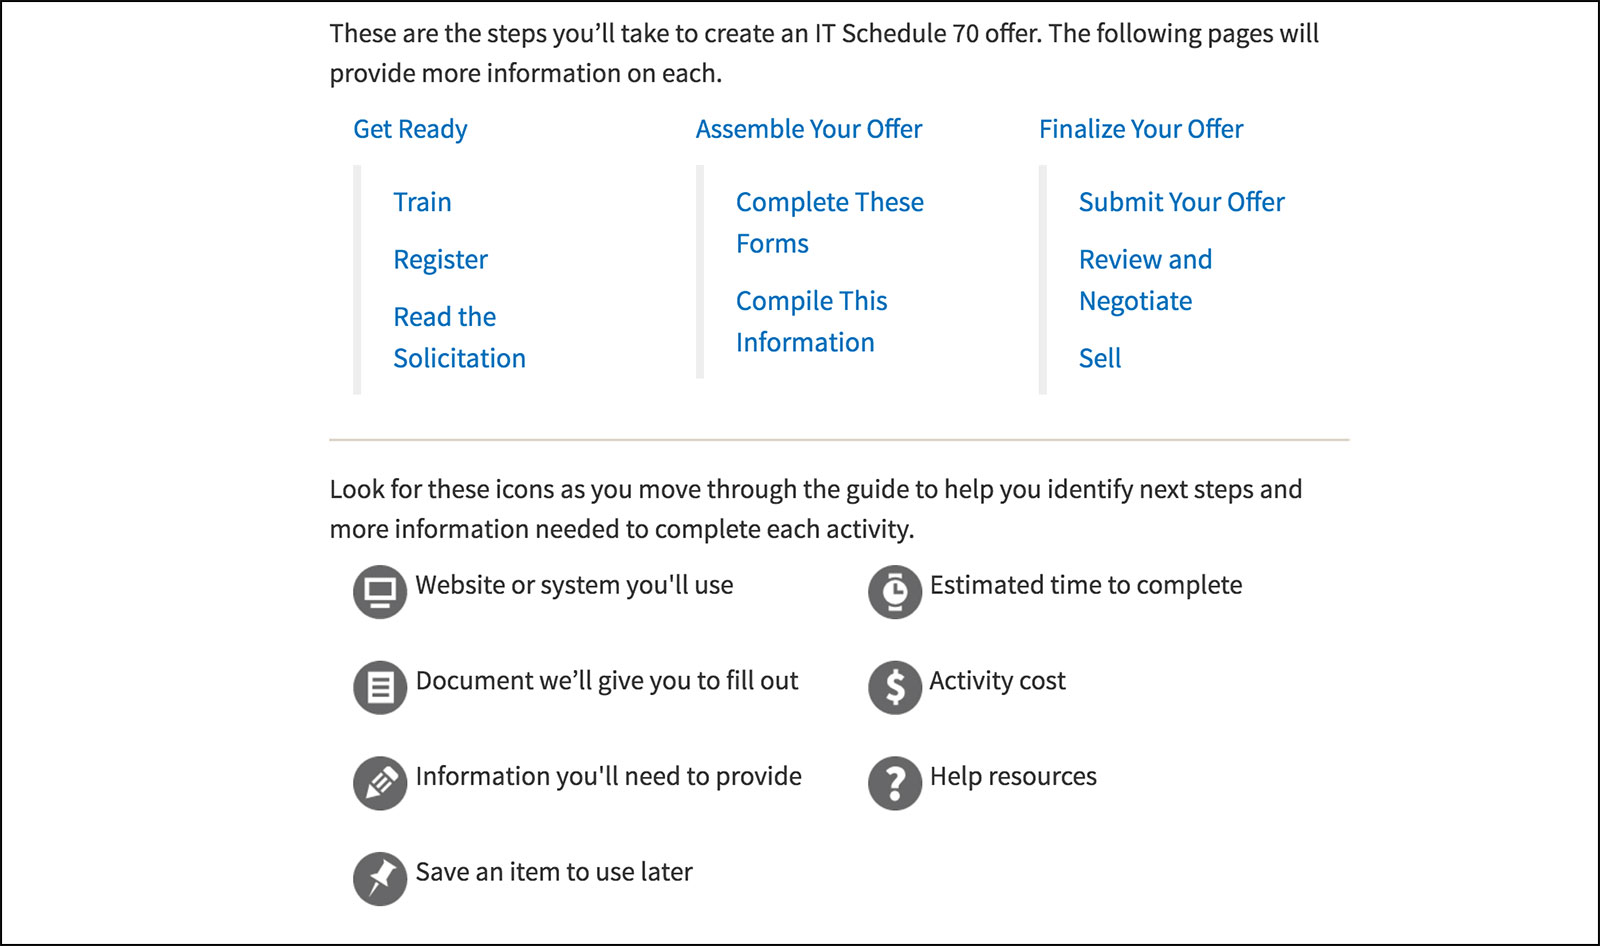 A screenshot from the IT Schedule 70 guide